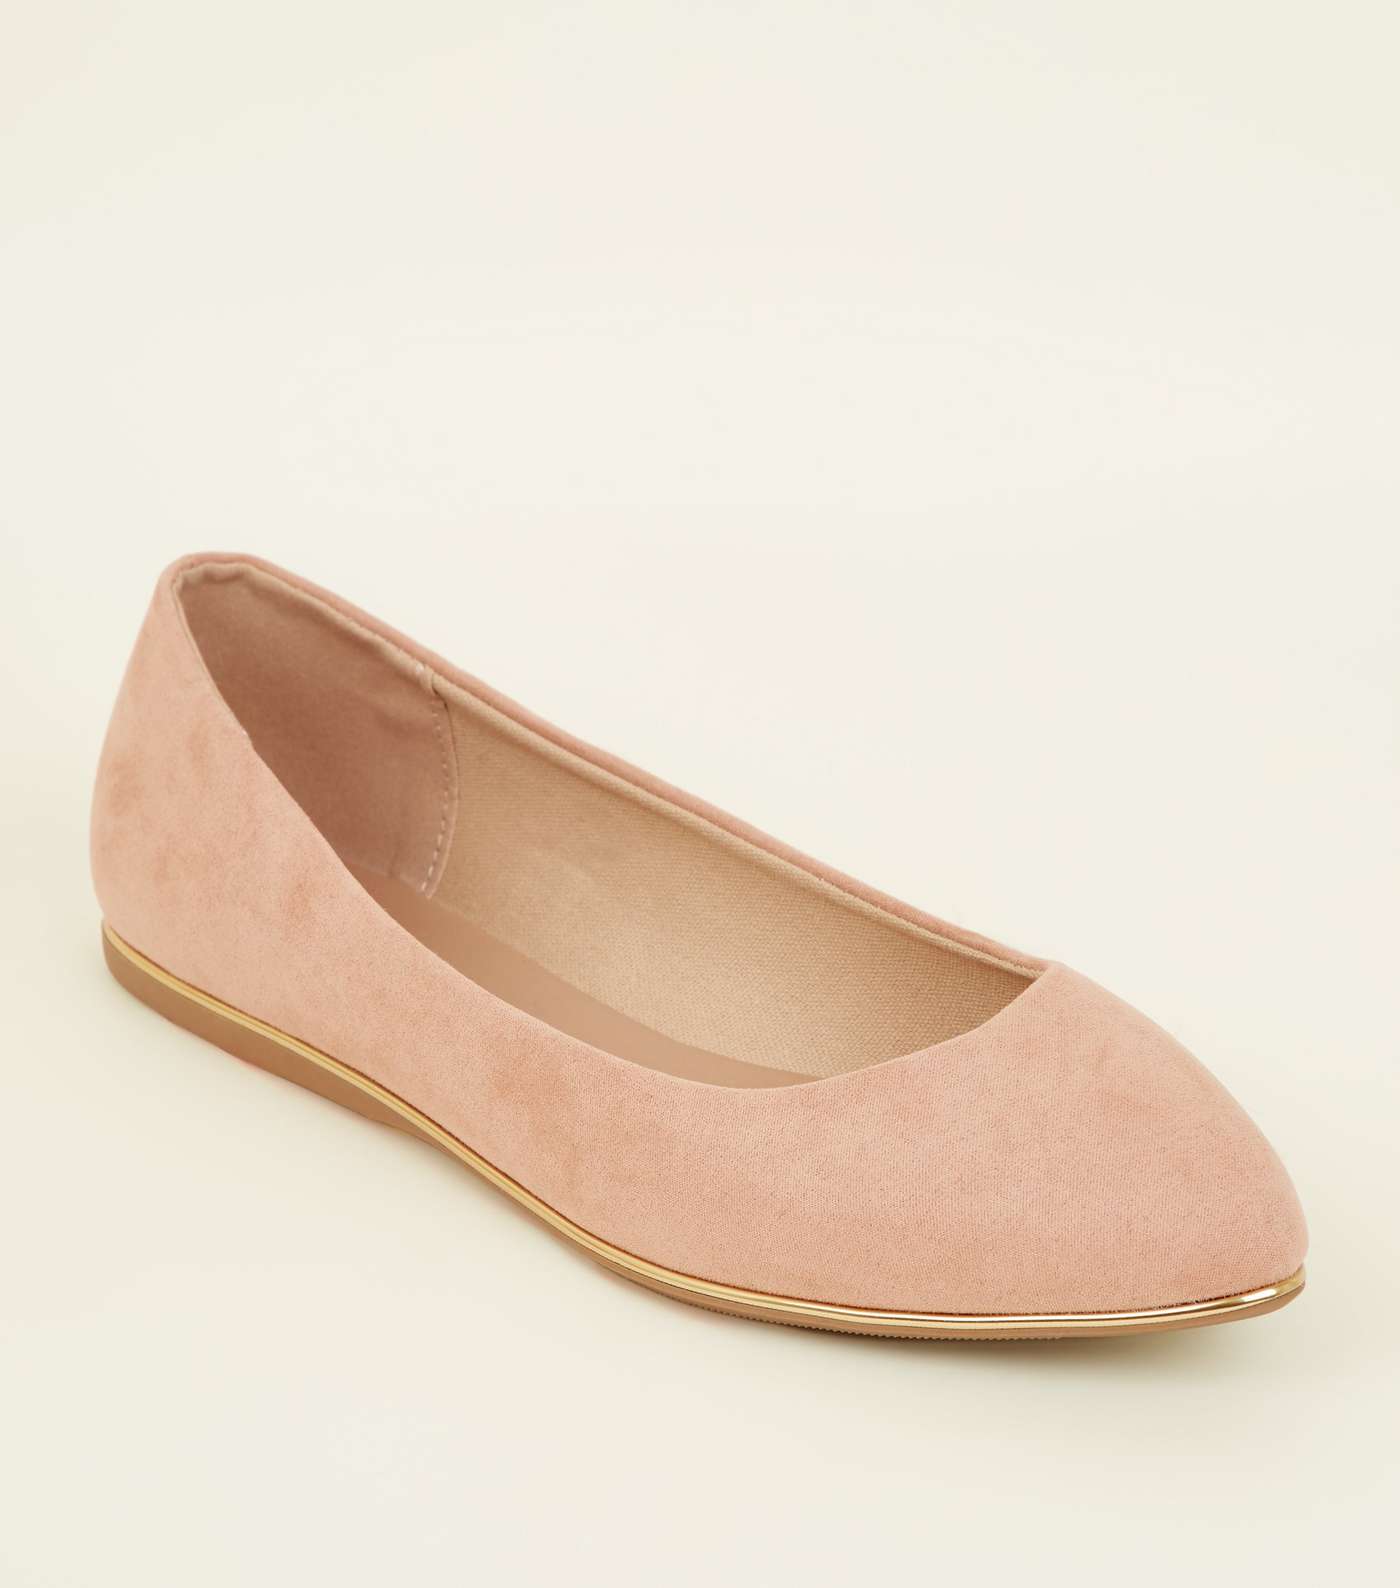 Wide Fit Nude Suedette Piped Edge Ballet Pumps